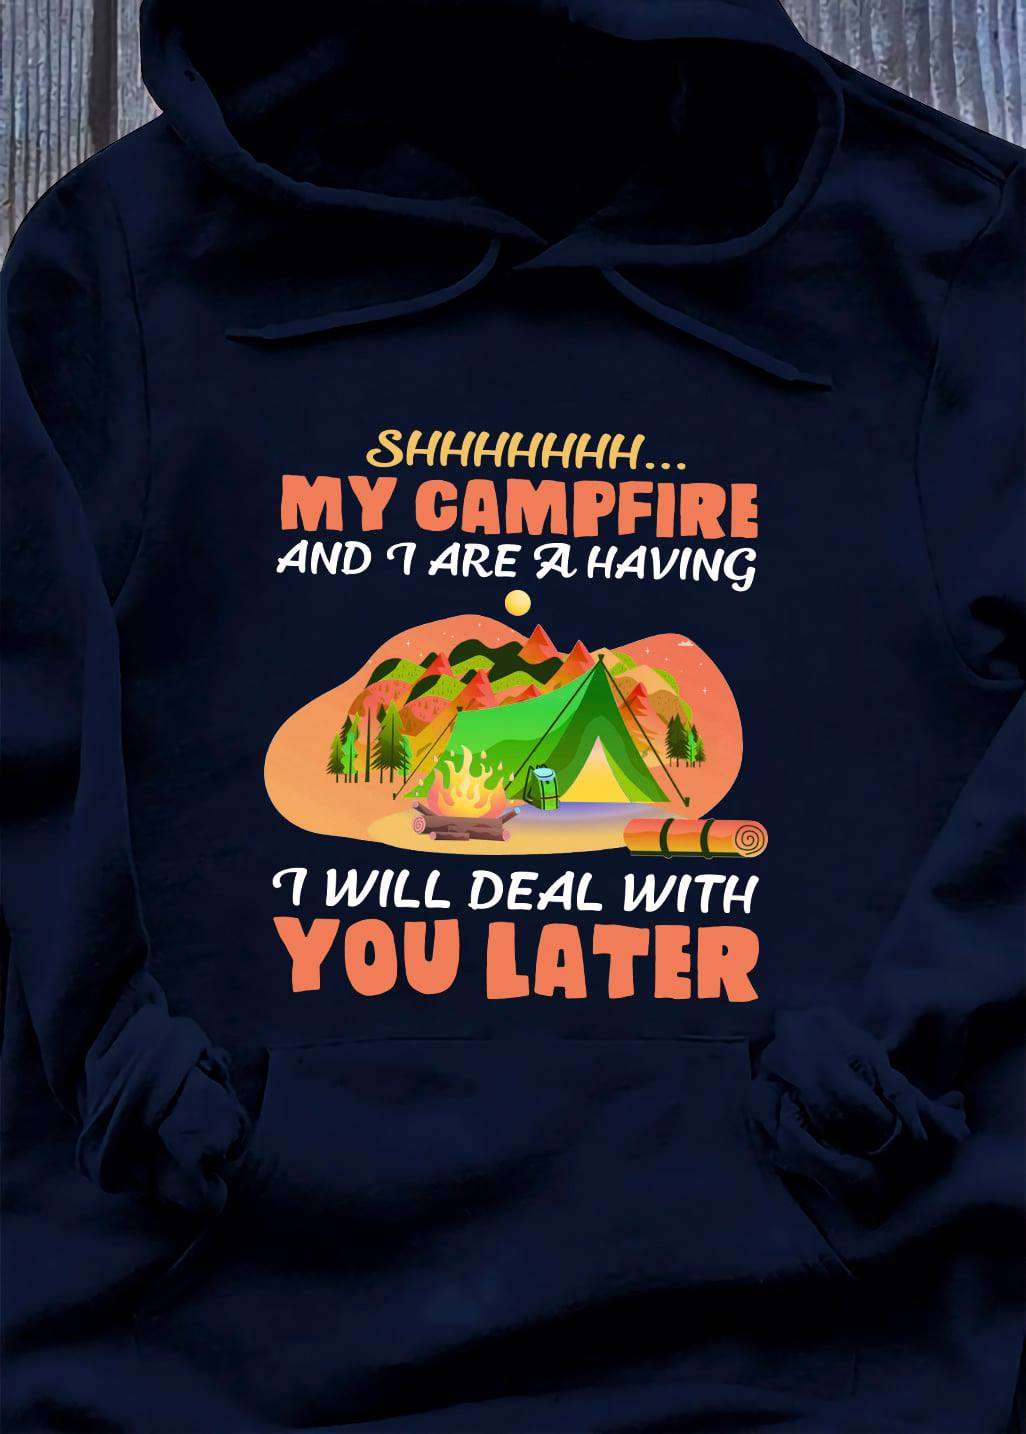 I will deal with you later - Camp fire graphic, camping the hobby